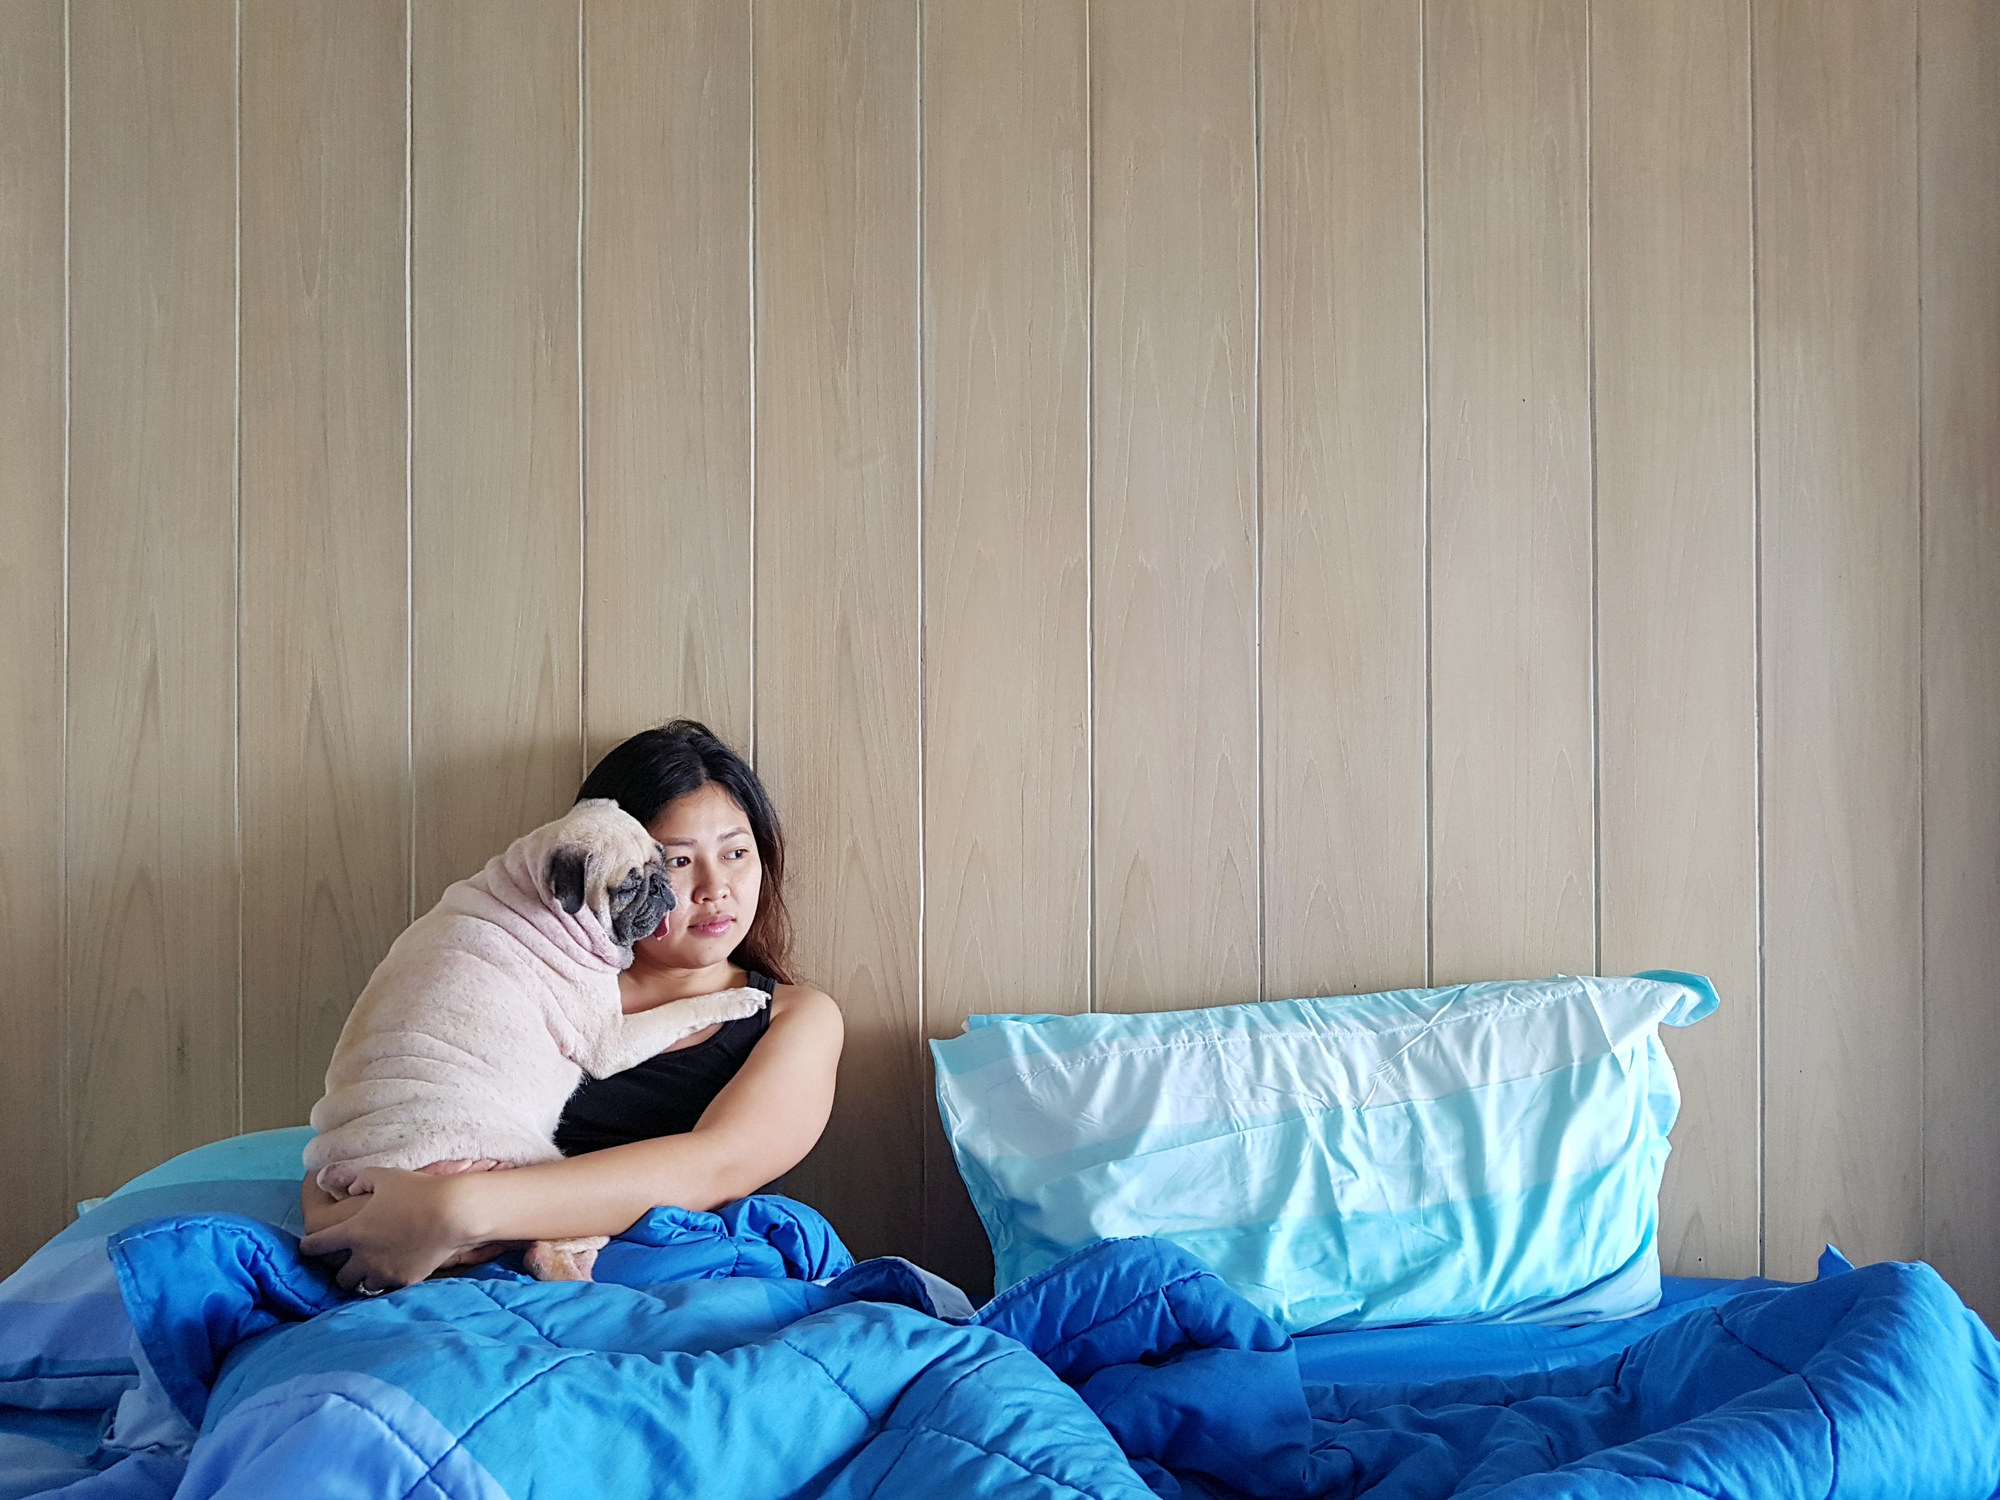 A woman in bed with her dog